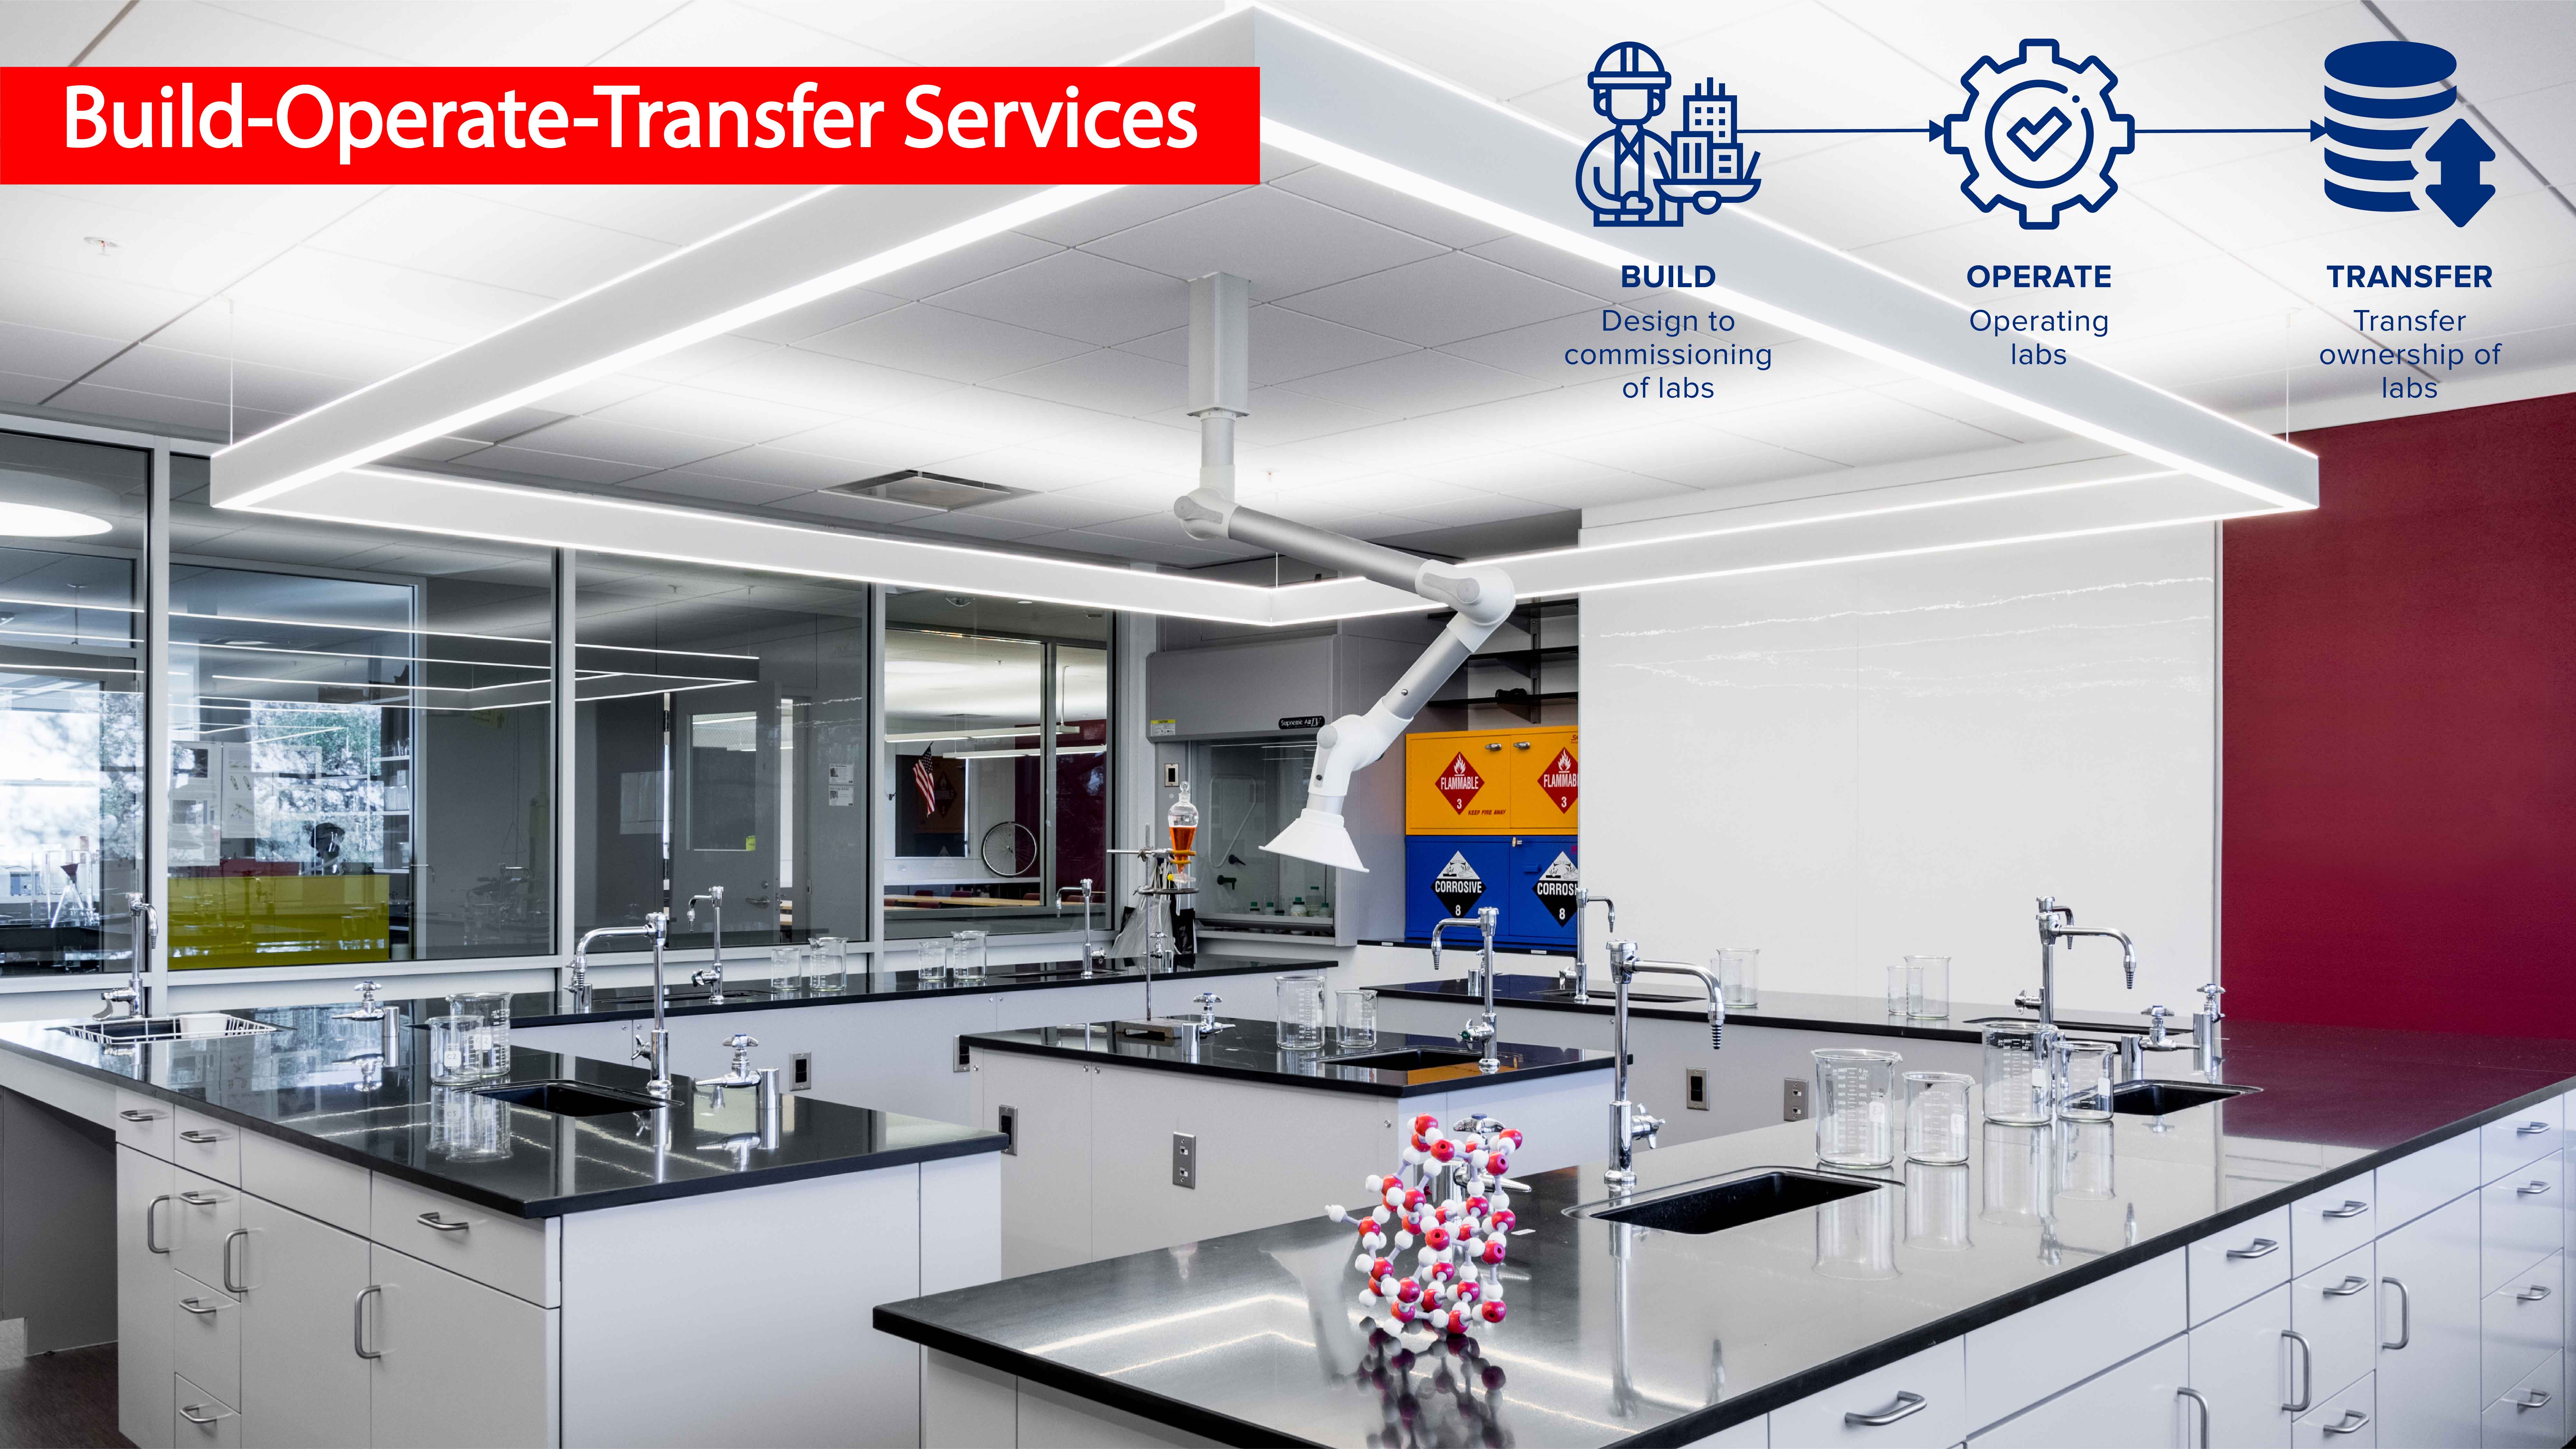 2-Build-operate-transfer-services 